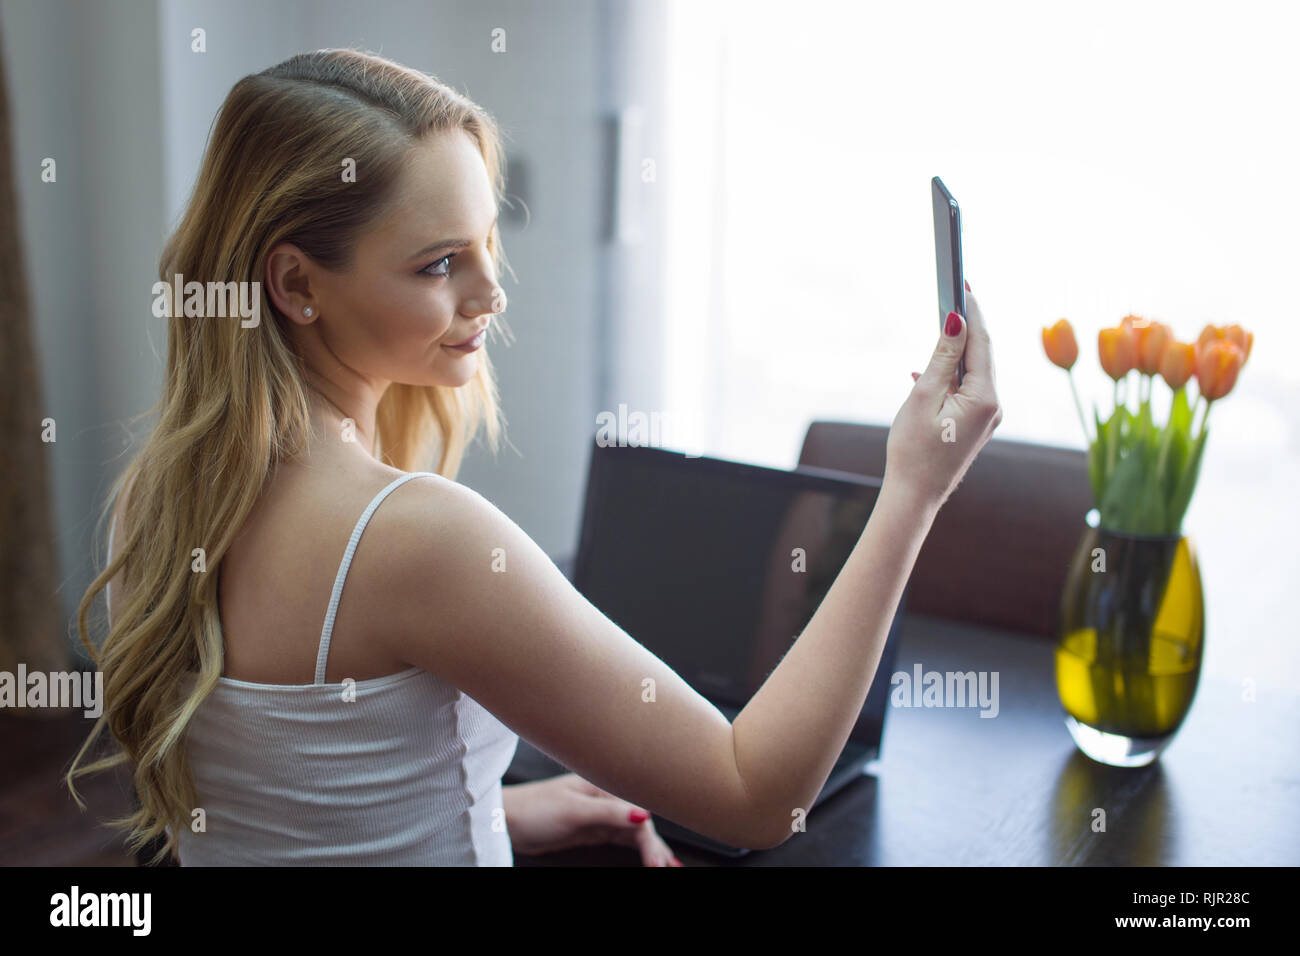 Young blonde woman video calling on smartphone at home Stock Photo